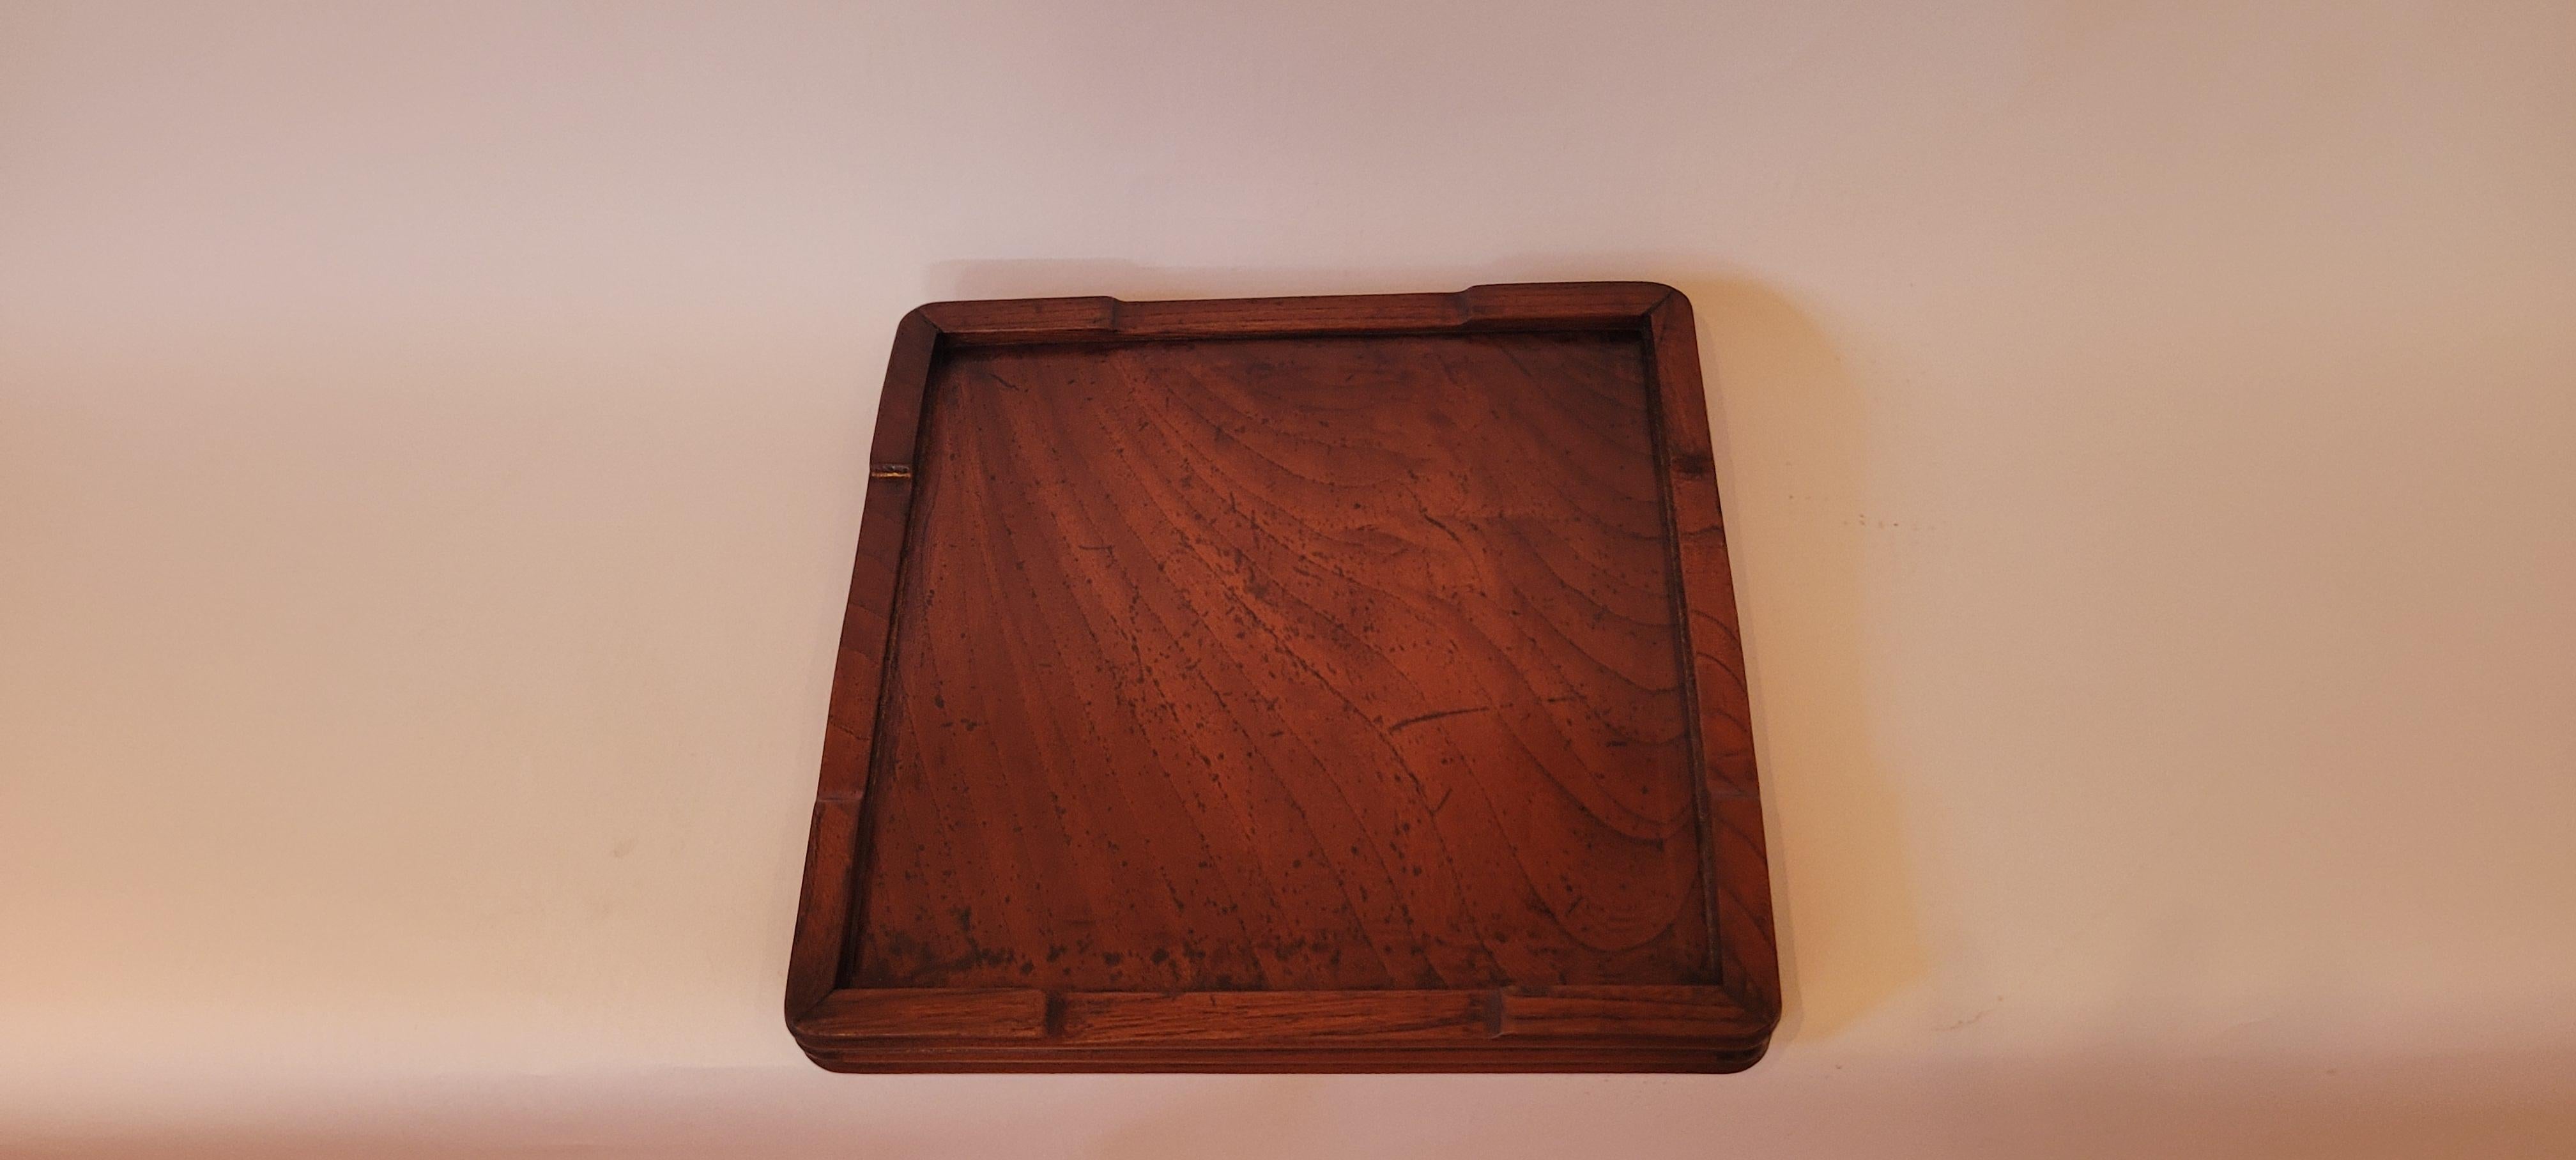 Late 19th Century Tea Tray For Sale 4